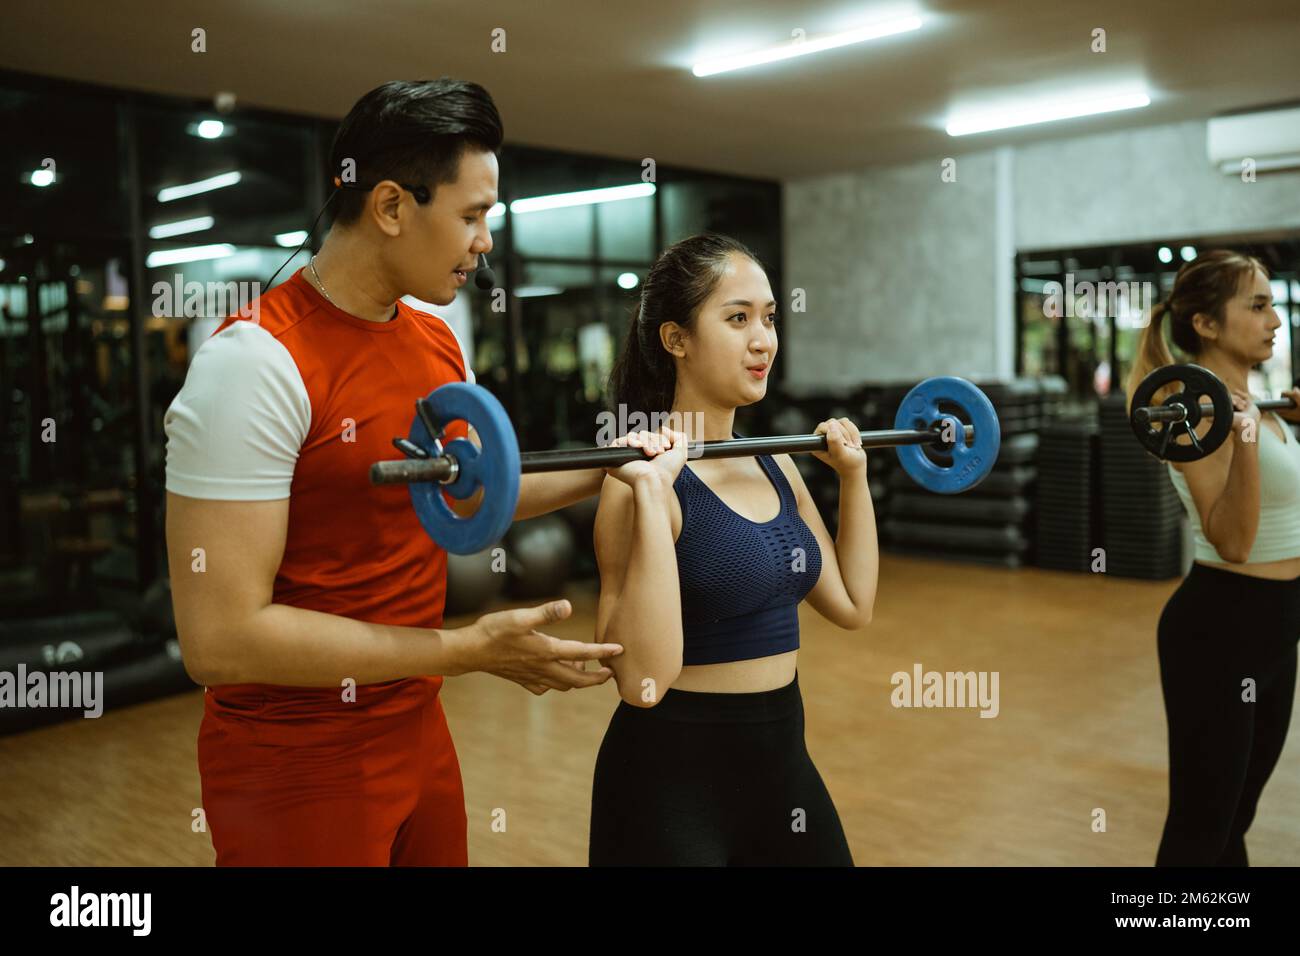 instructor instructs young woman on proper movements using a barbell Stock Photo